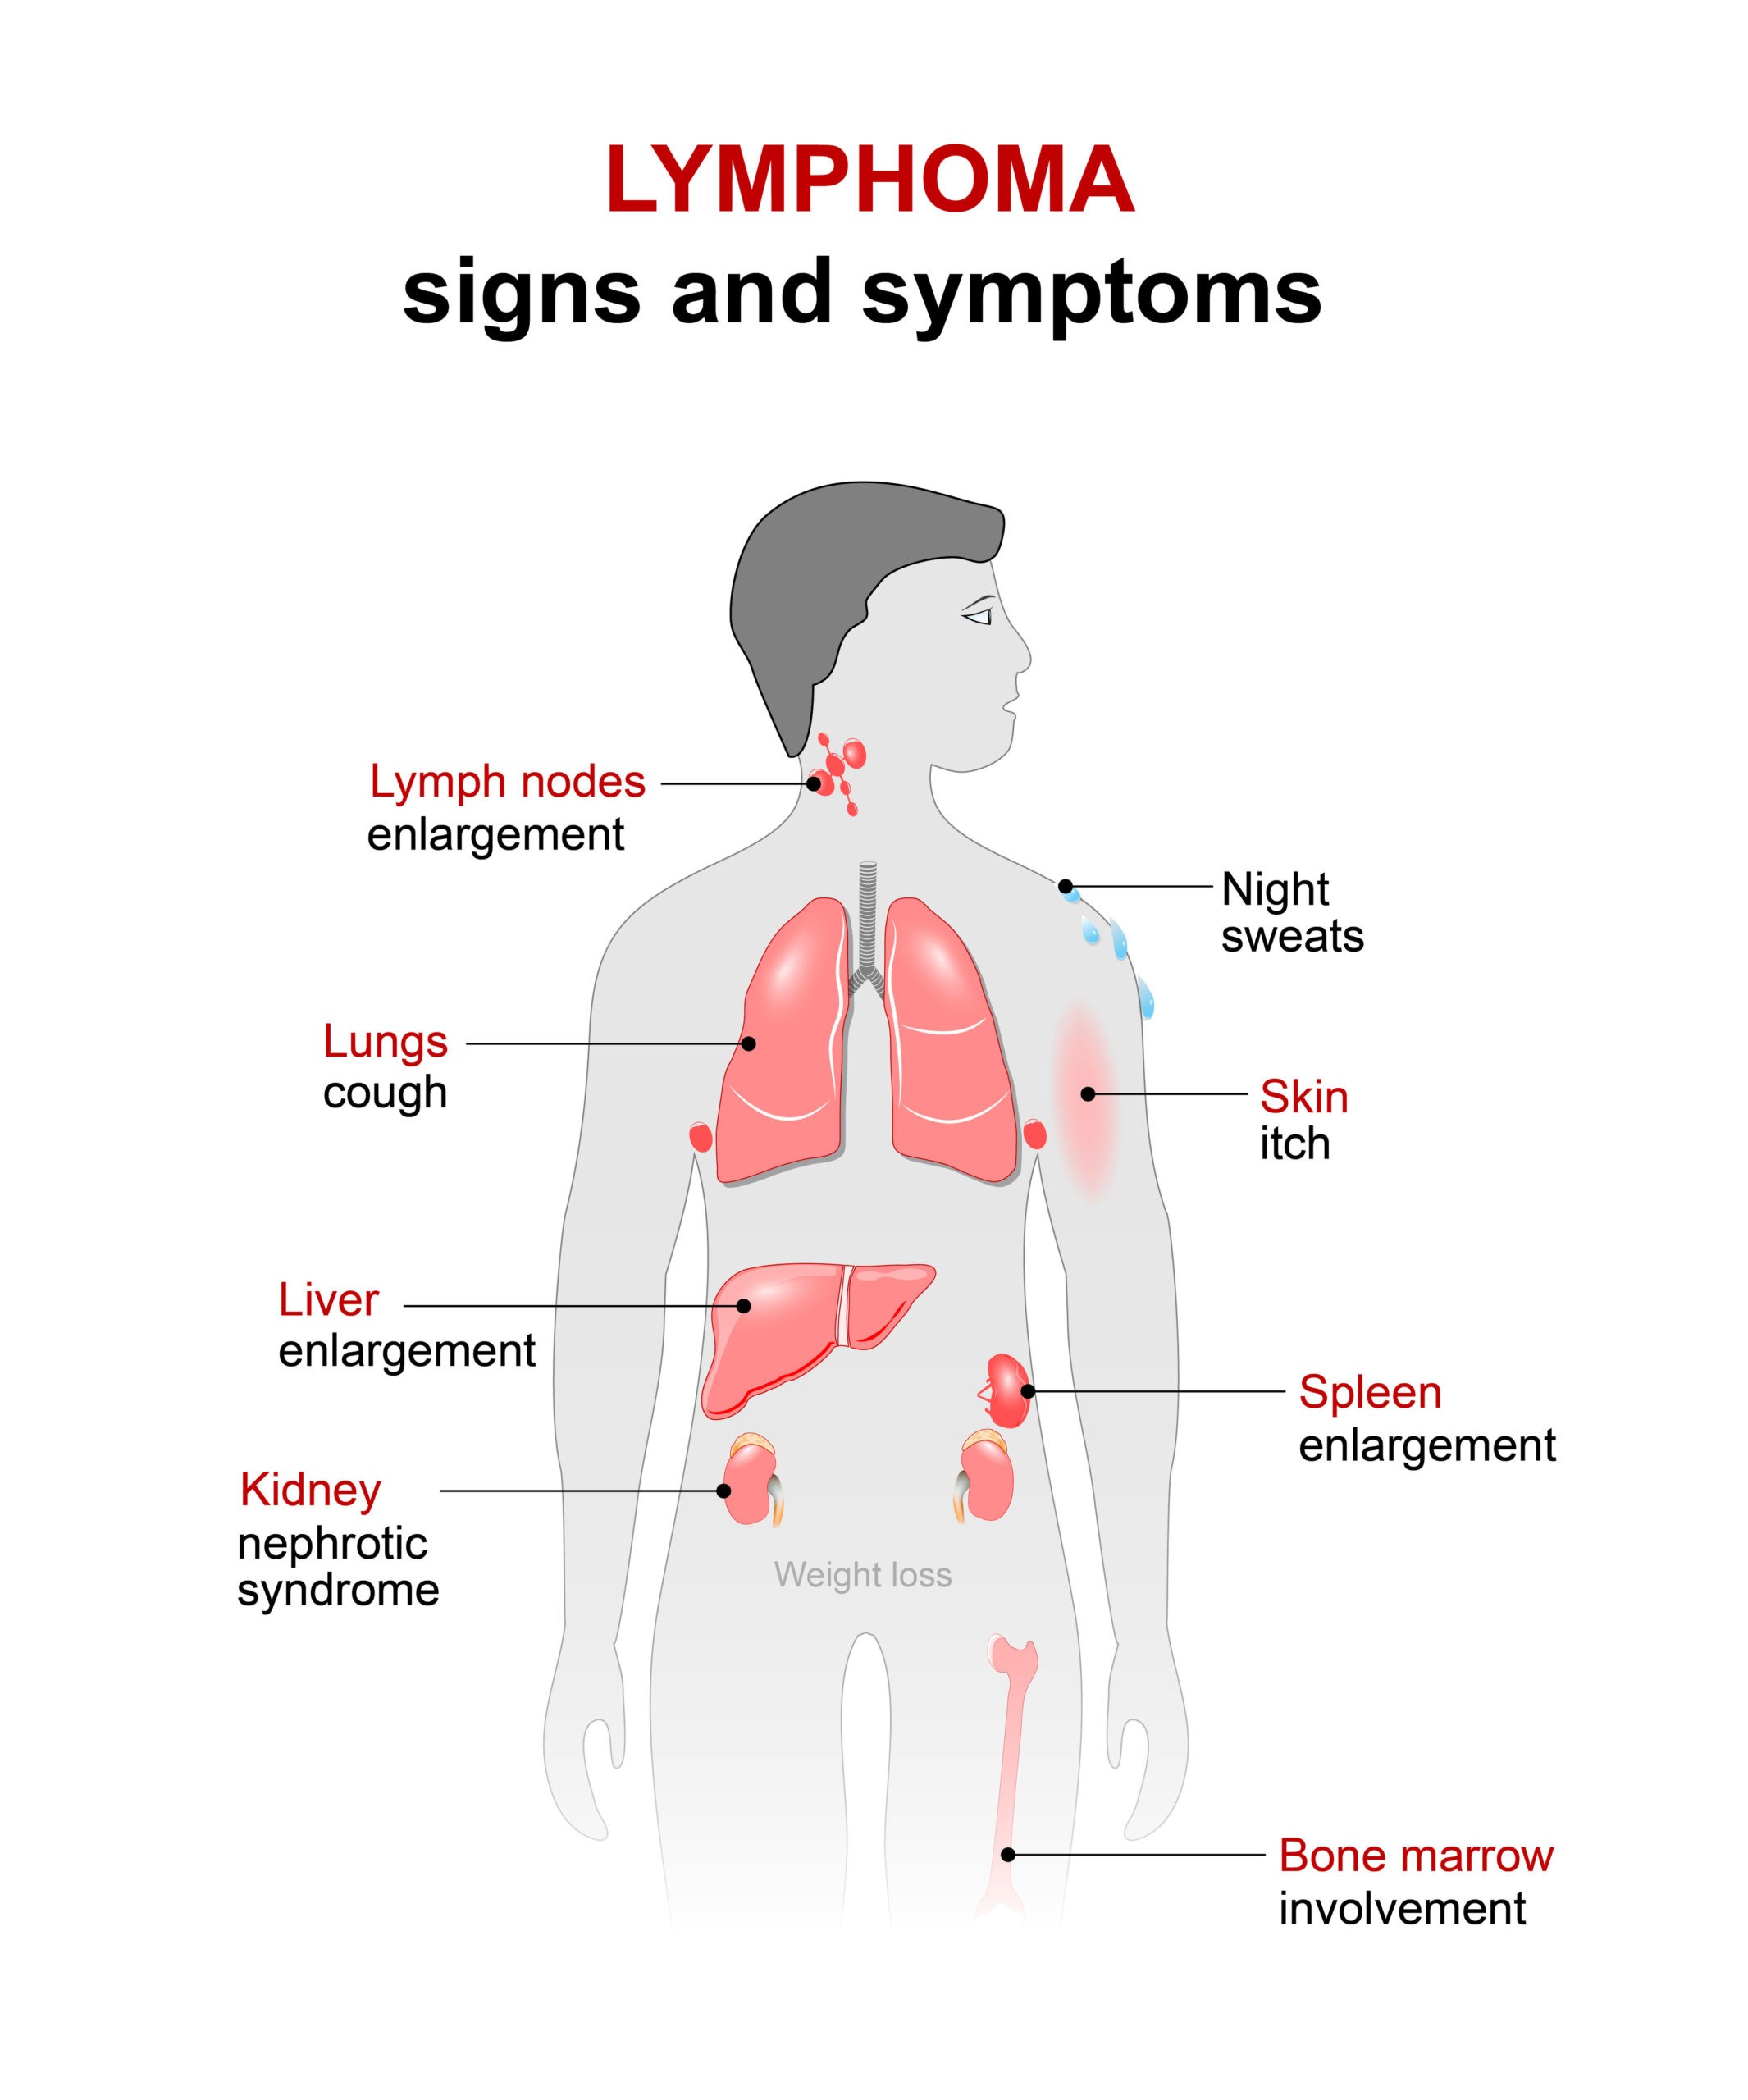 signs and symptoms of lymphoma